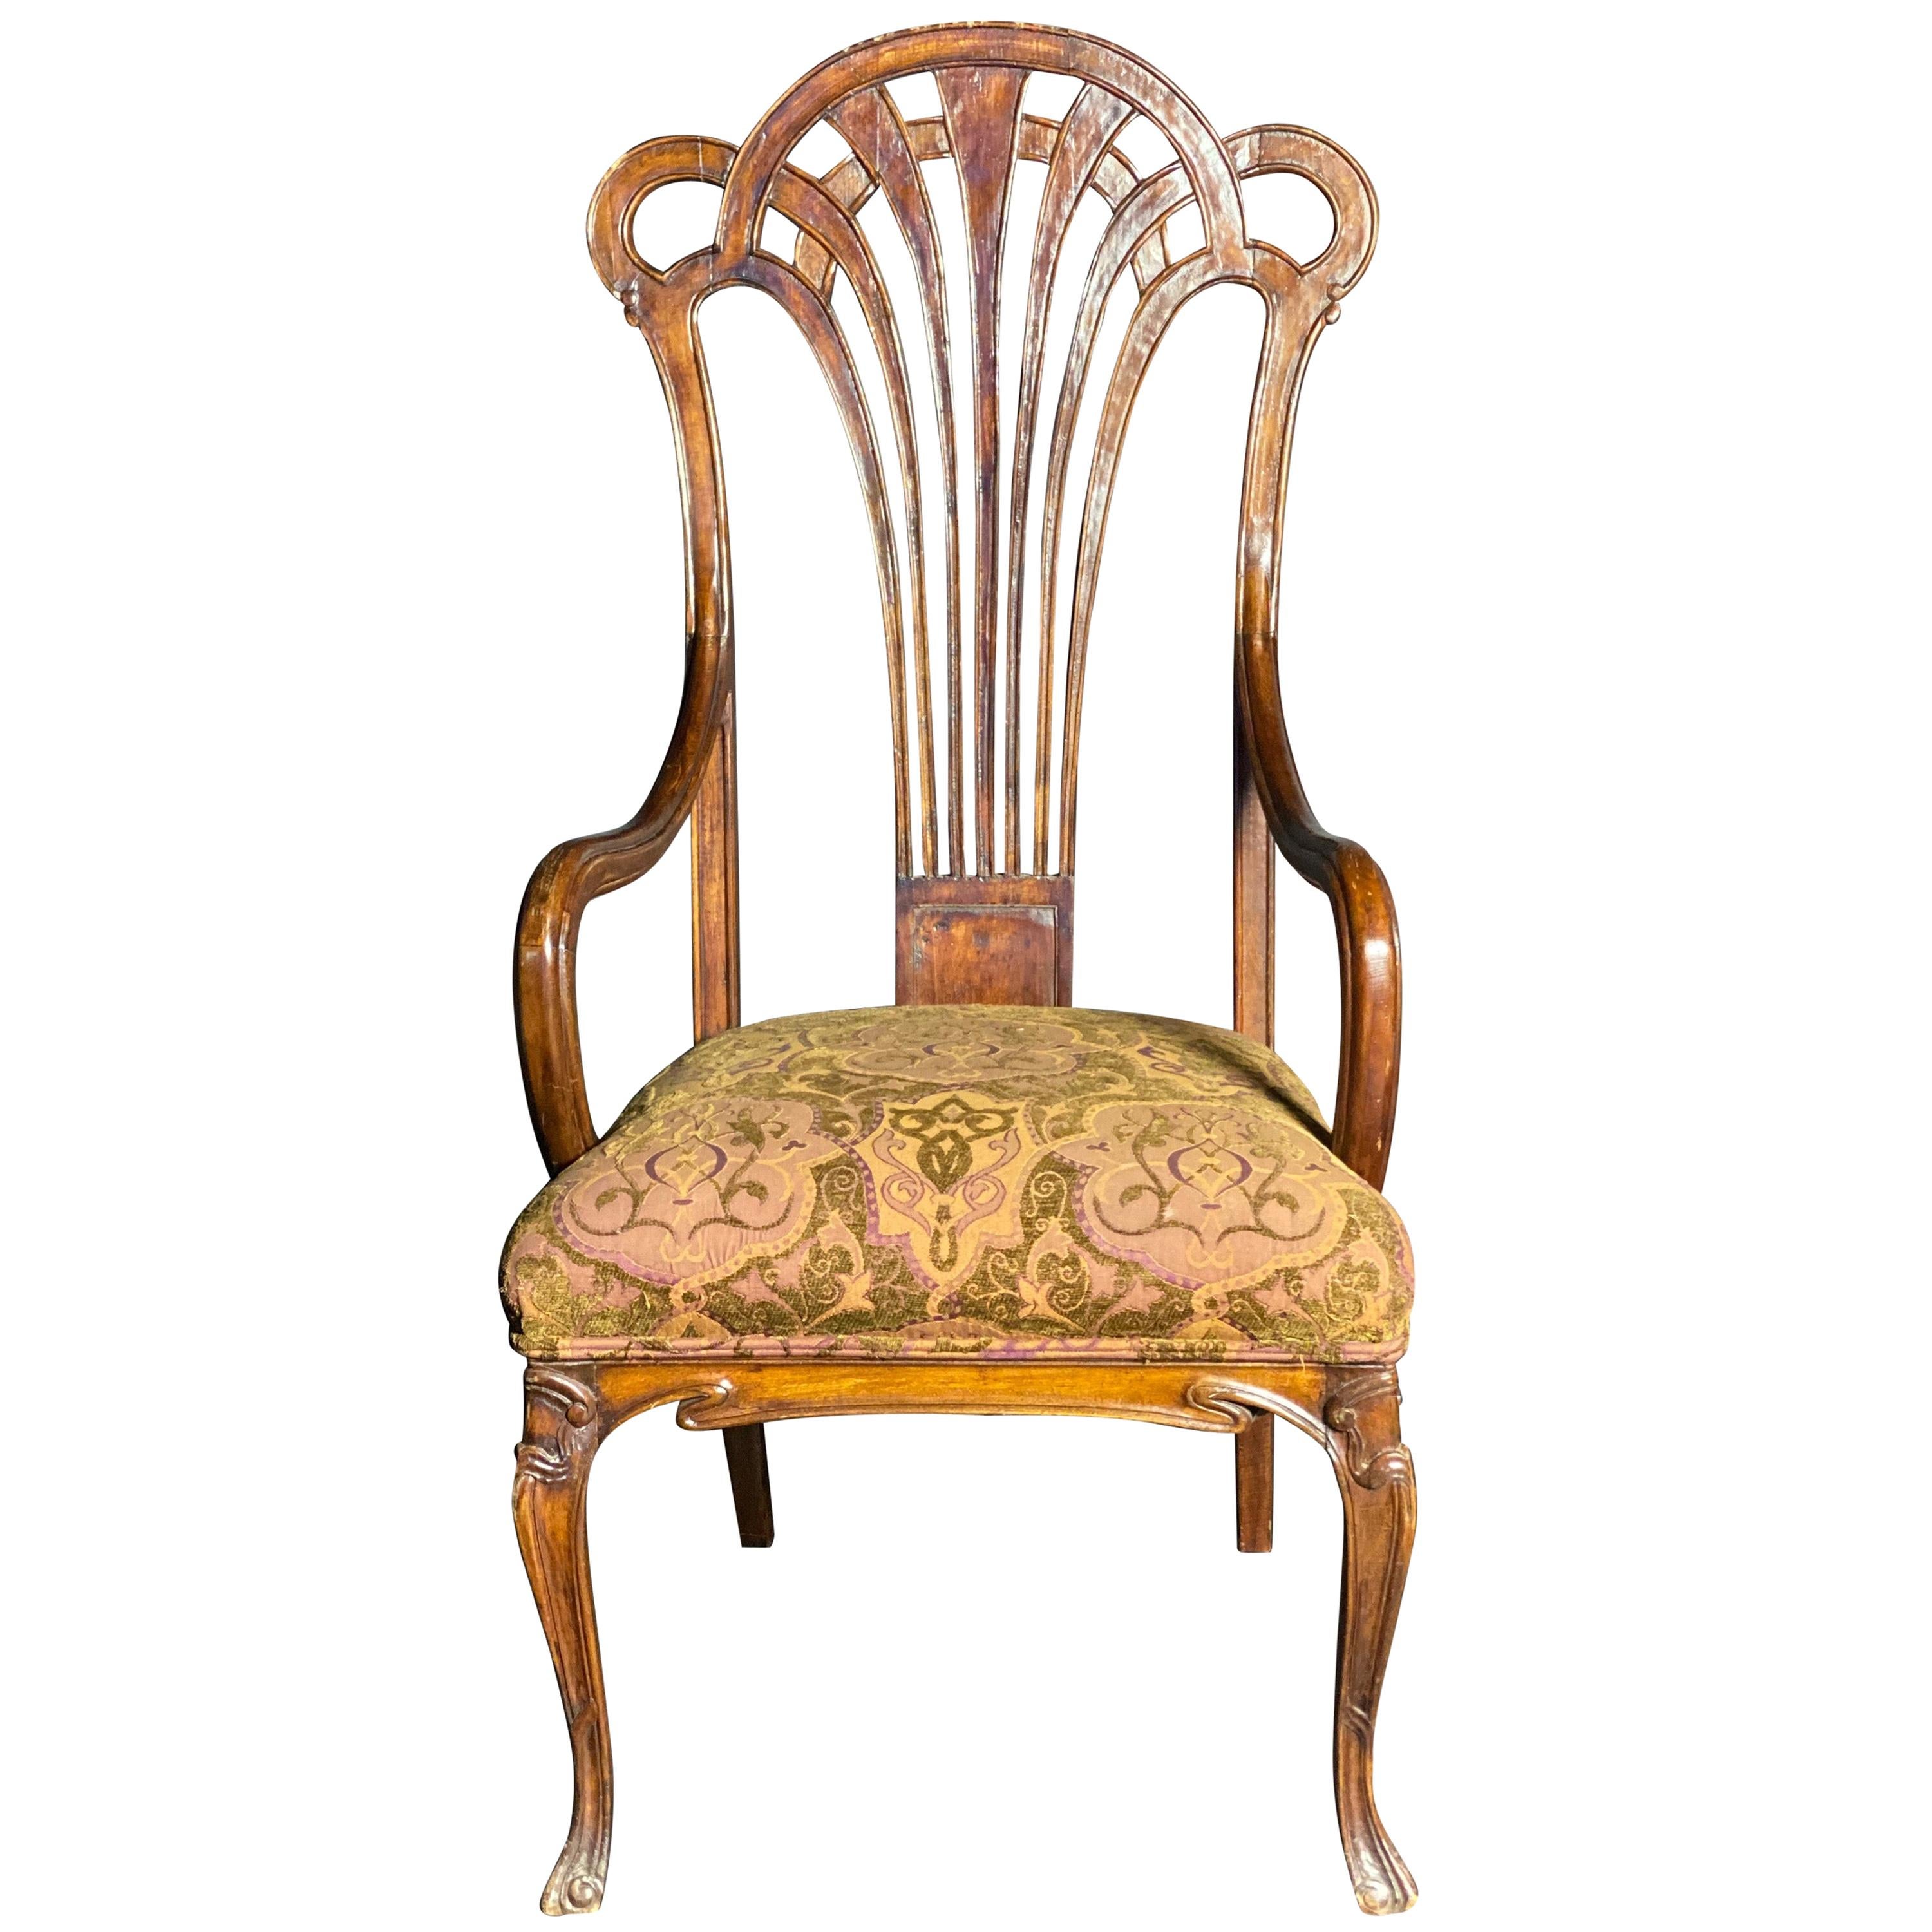 Exceptional and Large French Art Nouveau Mahogany Armchair, Eugene Gaillard